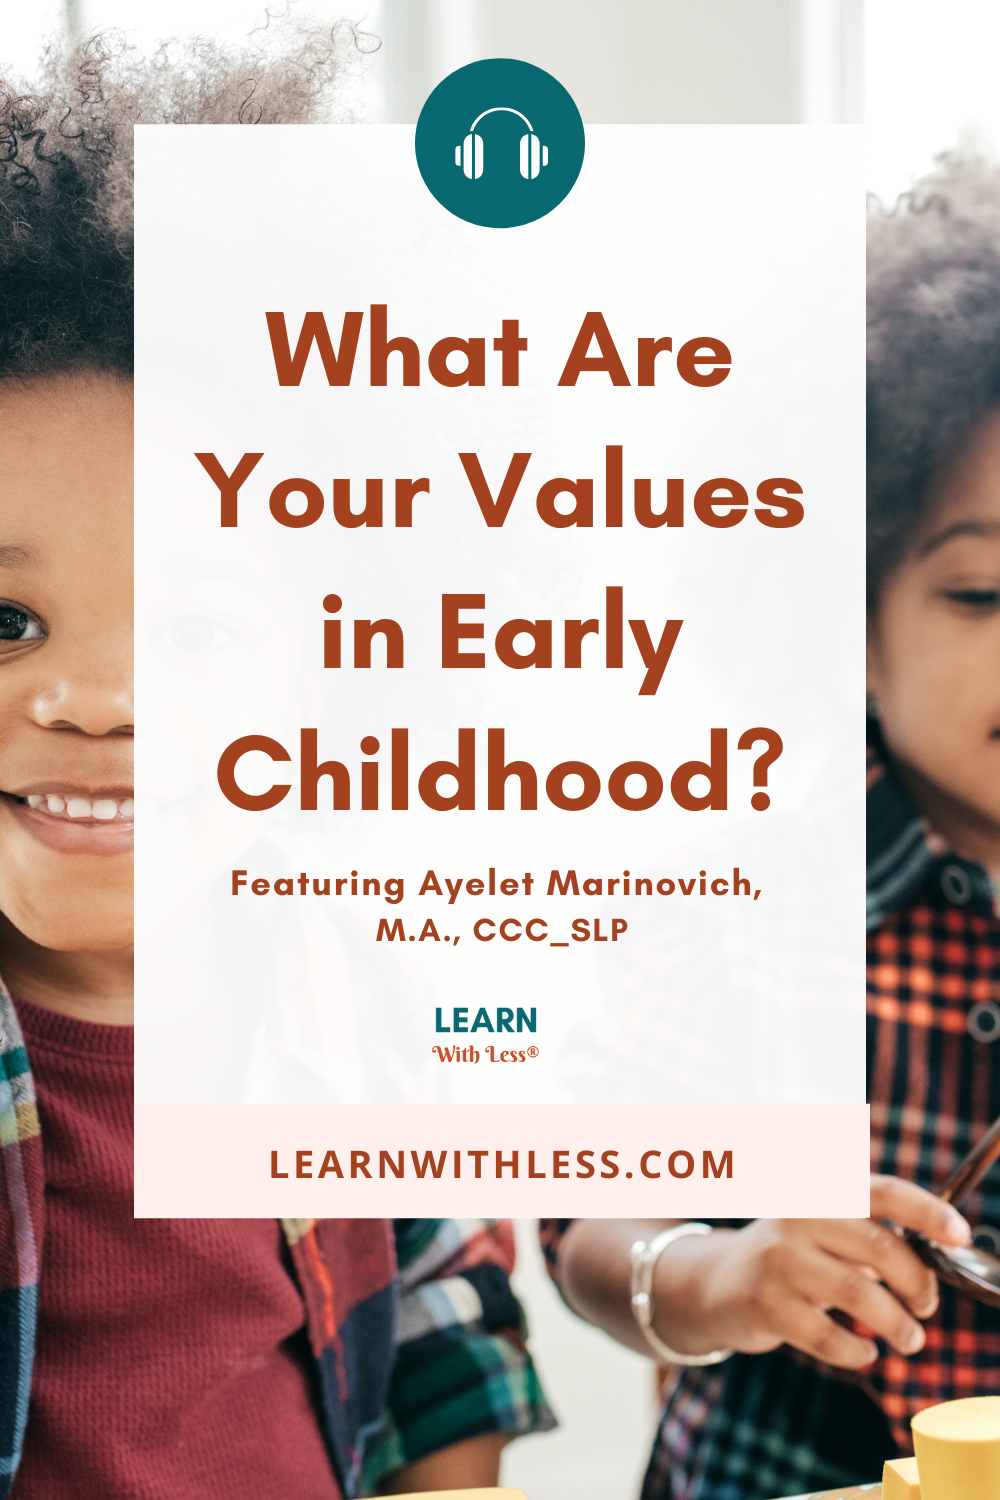 What Are Your Values as a Parent or Professional in Early Childhood?